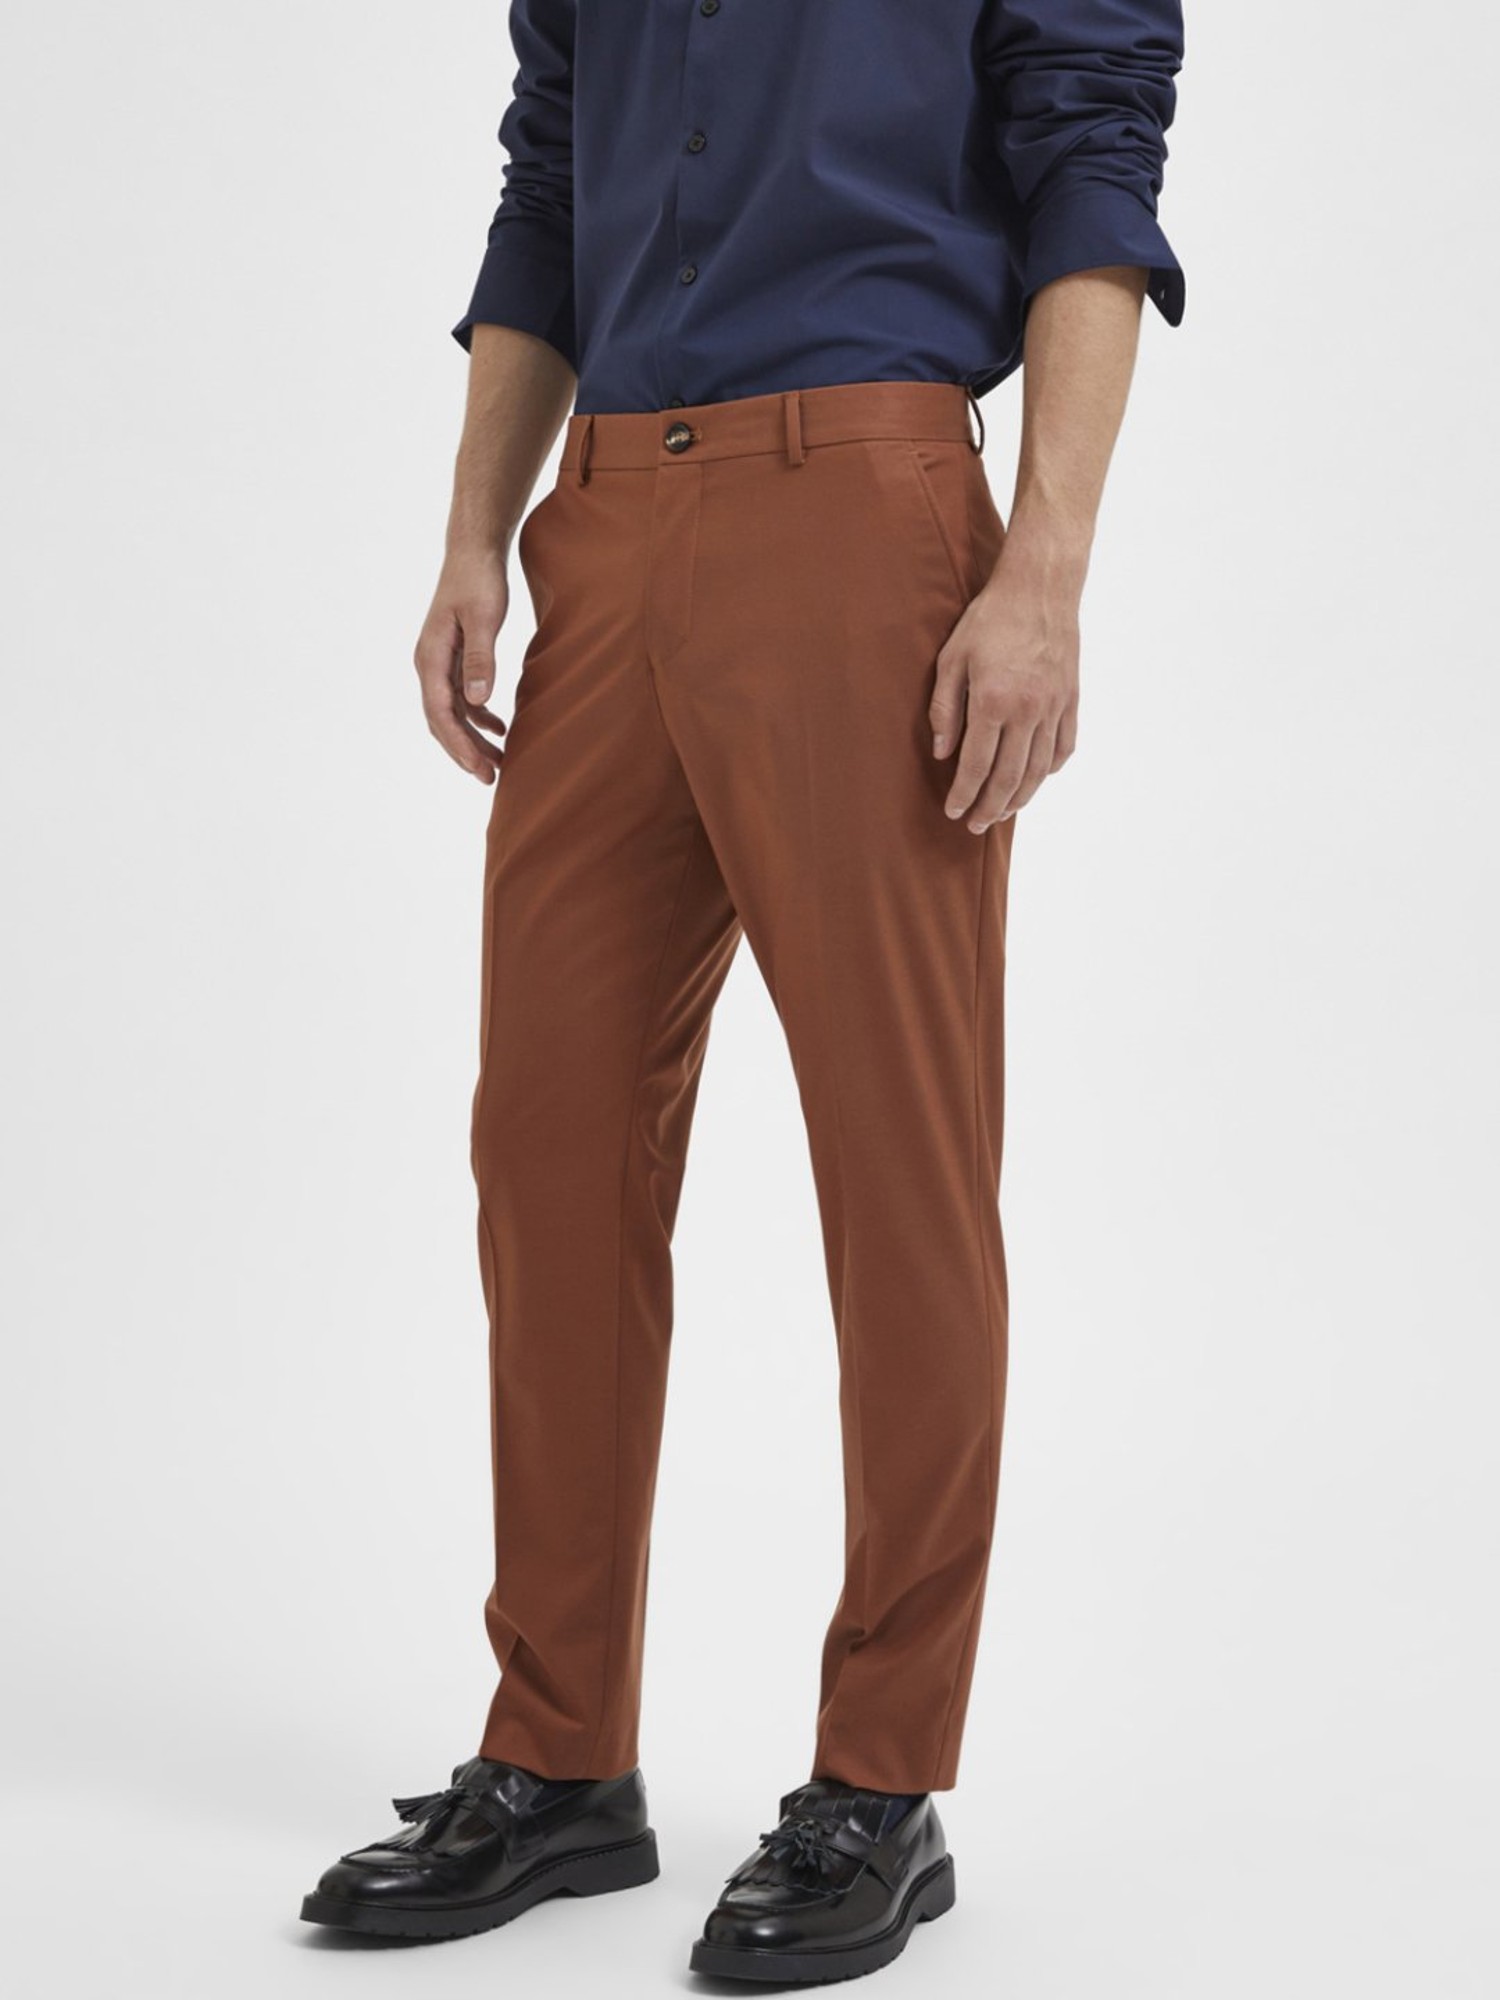 Buy Blue Checks Slim Fit Trousers for Men at SELECTED HOMME  264996802